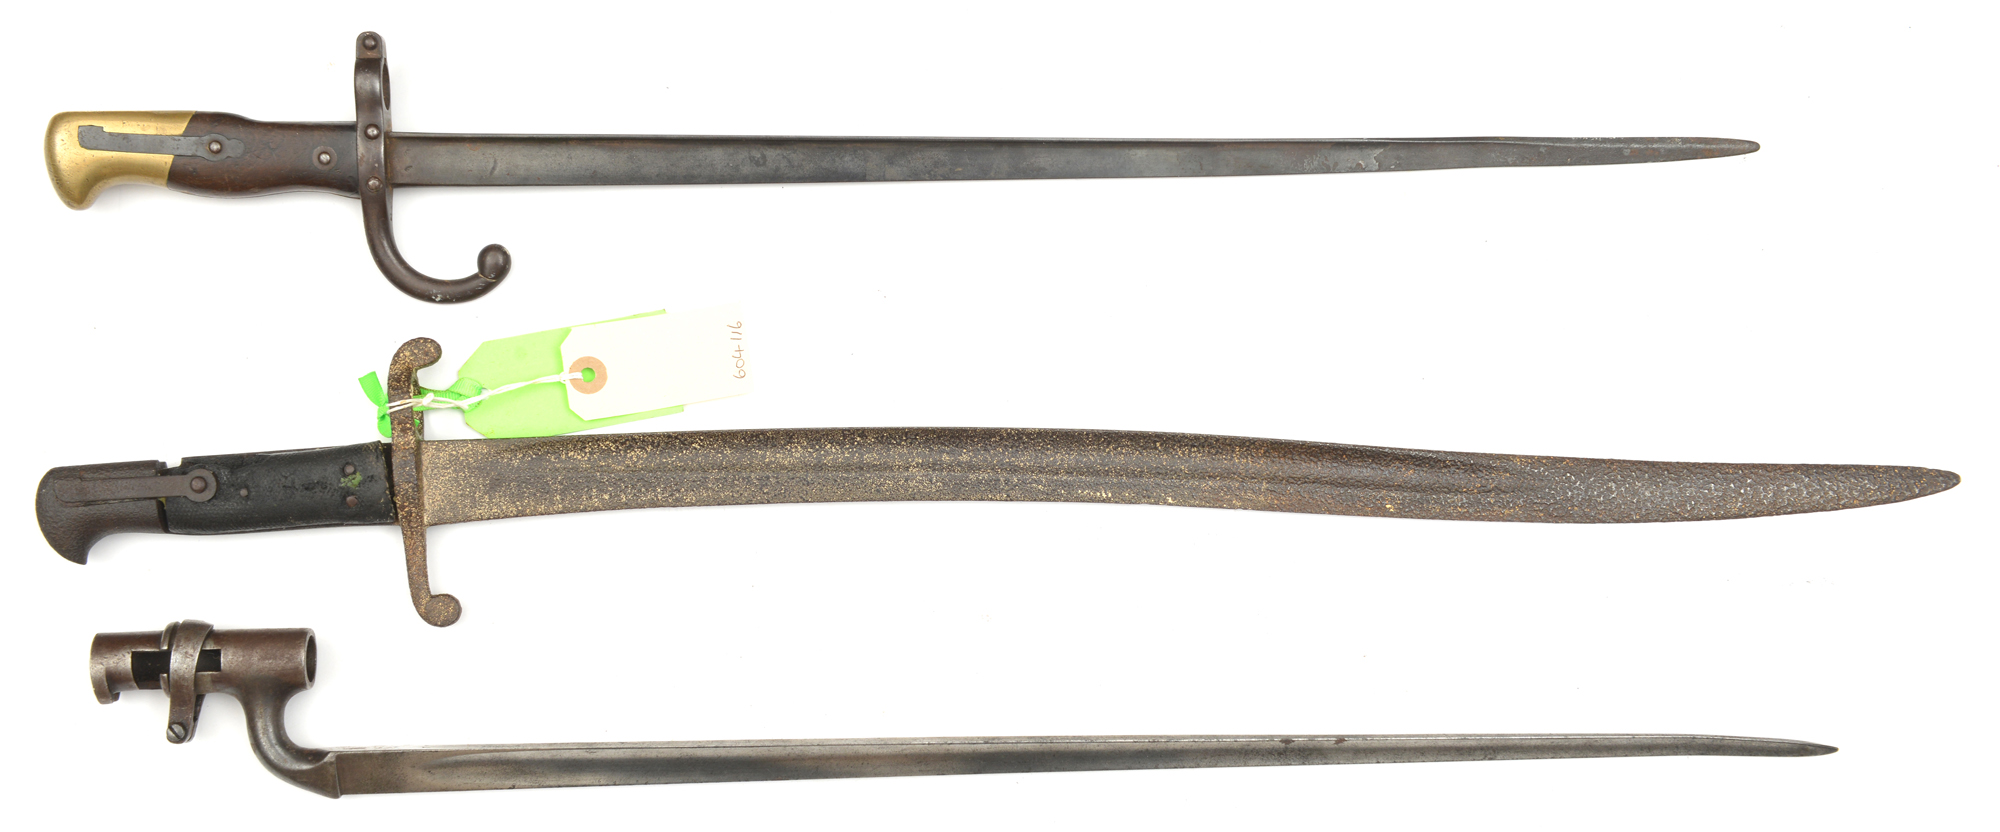 A Gras bayonet, d 1878 on backstrap and a P1876 socket bayonet for Martini Henry rifle, with